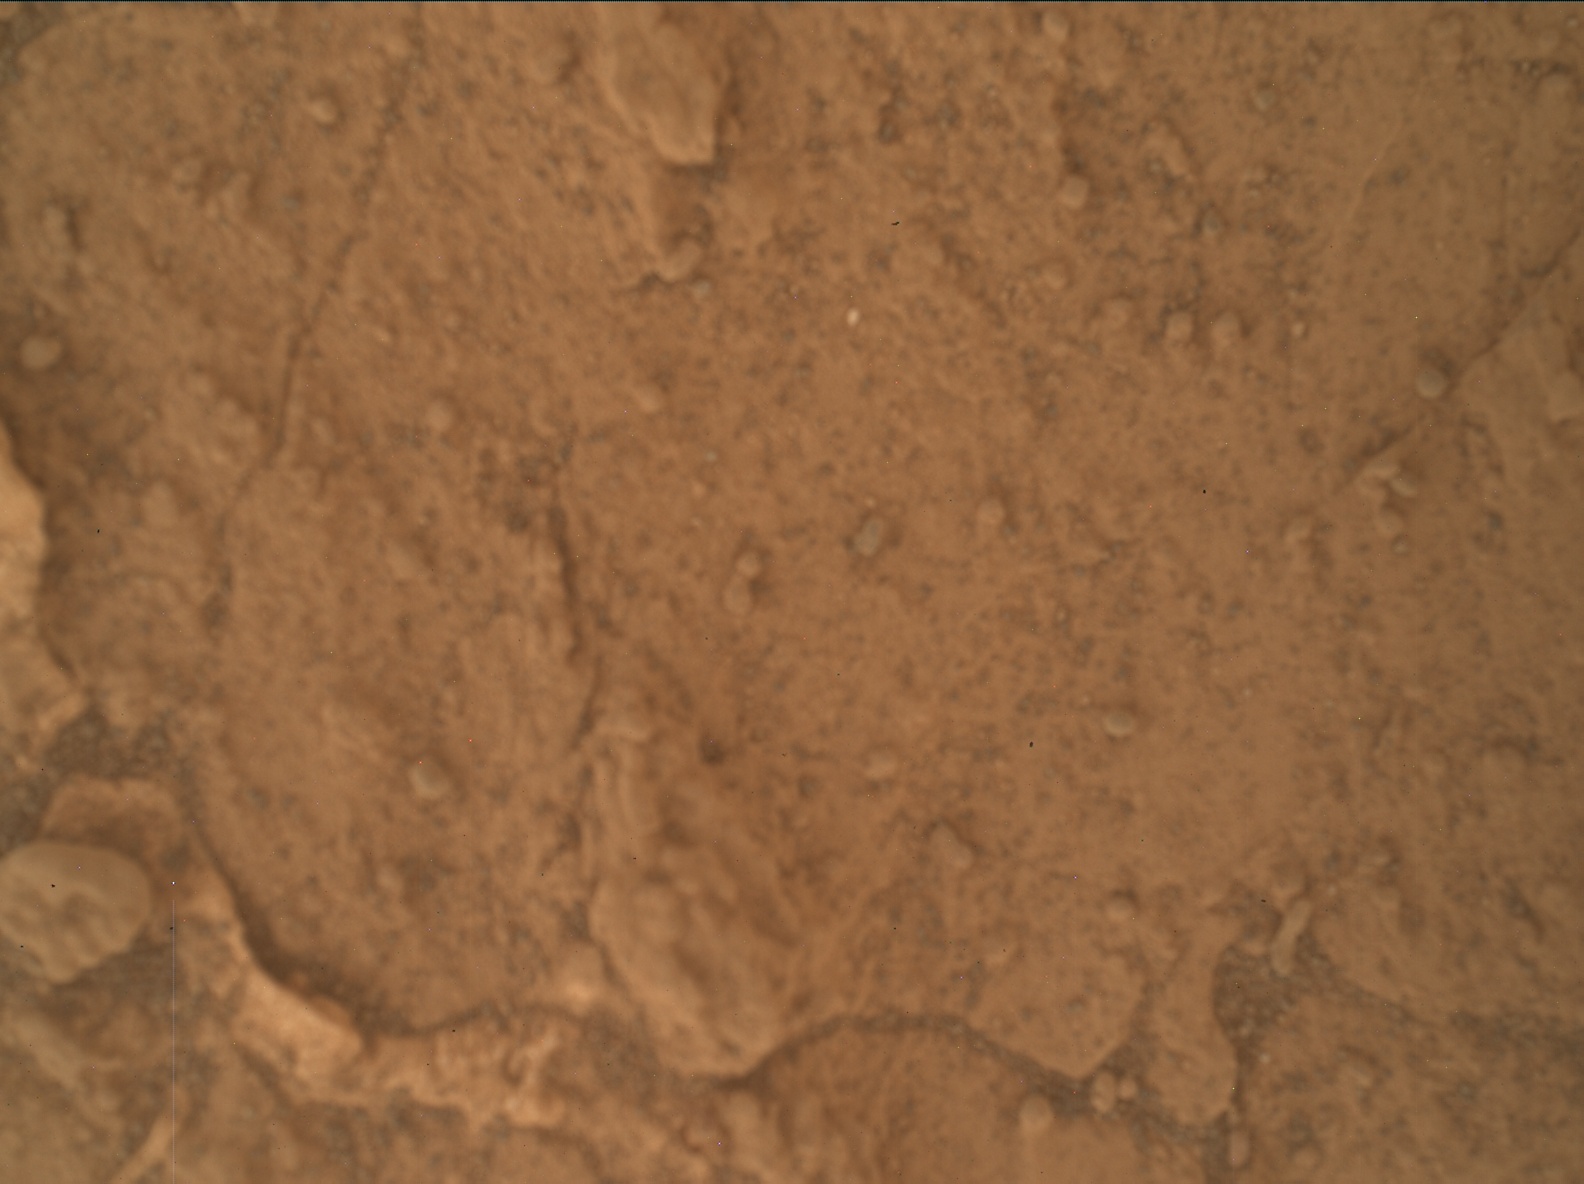 Nasa's Mars rover Curiosity acquired this image using its Mars Hand Lens Imager (MAHLI) on Sol 3190